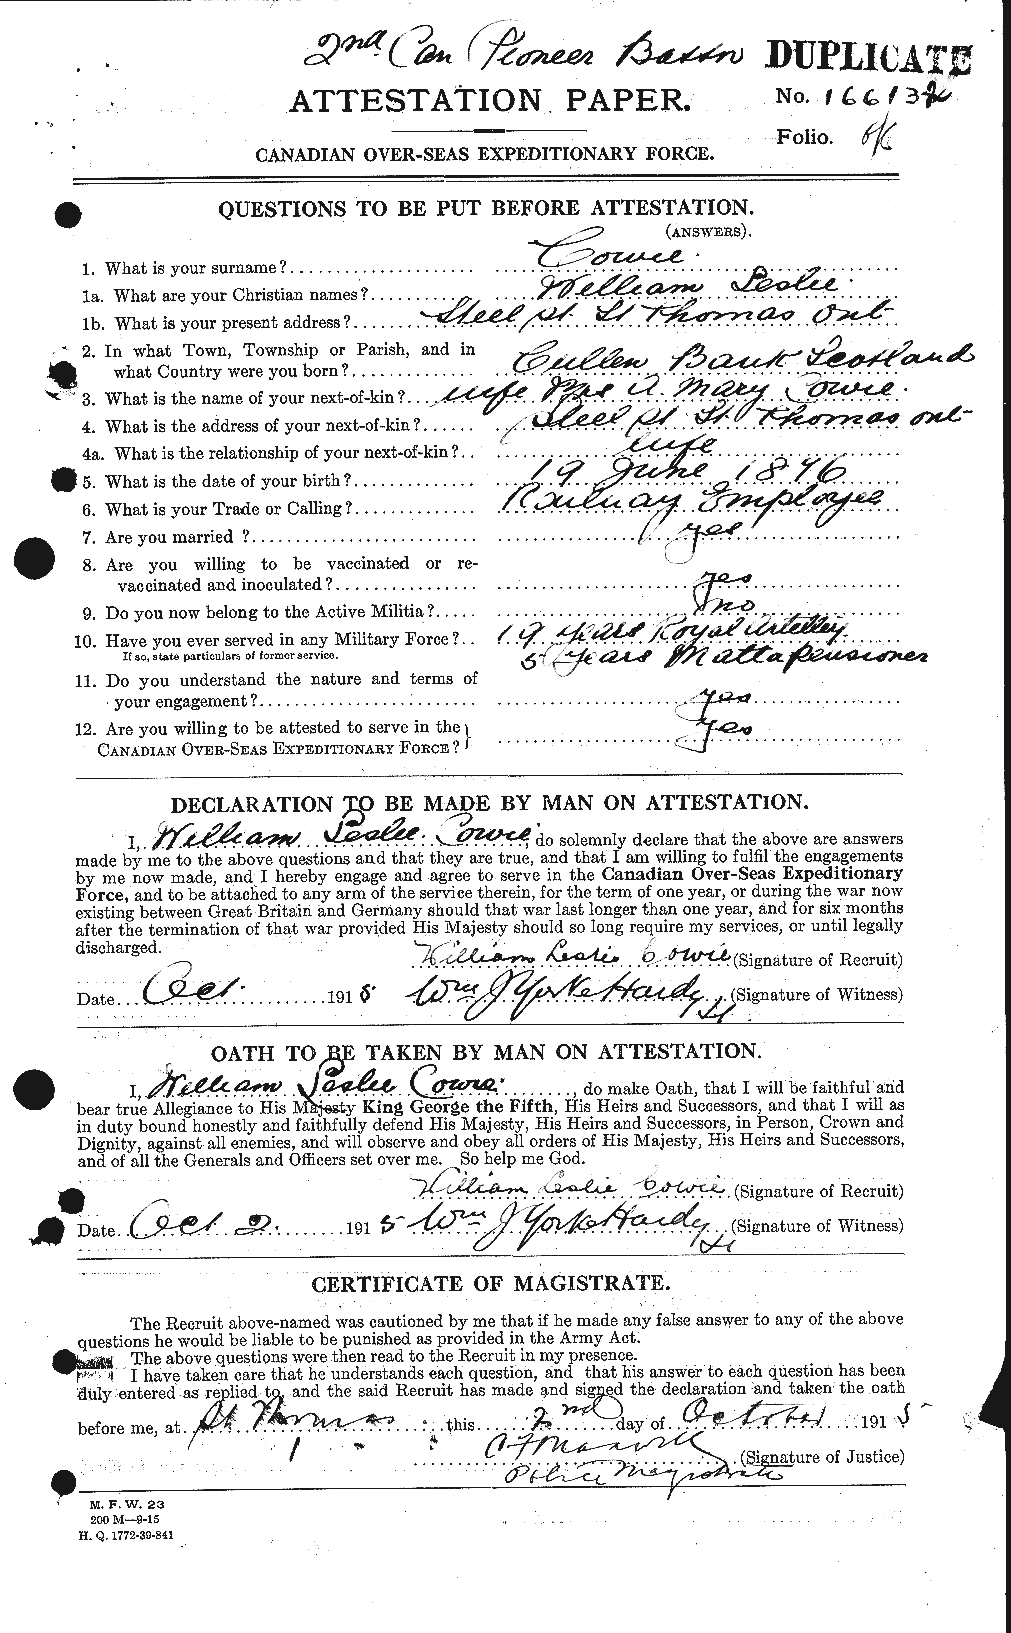 Personnel Records of the First World War - CEF 059859a